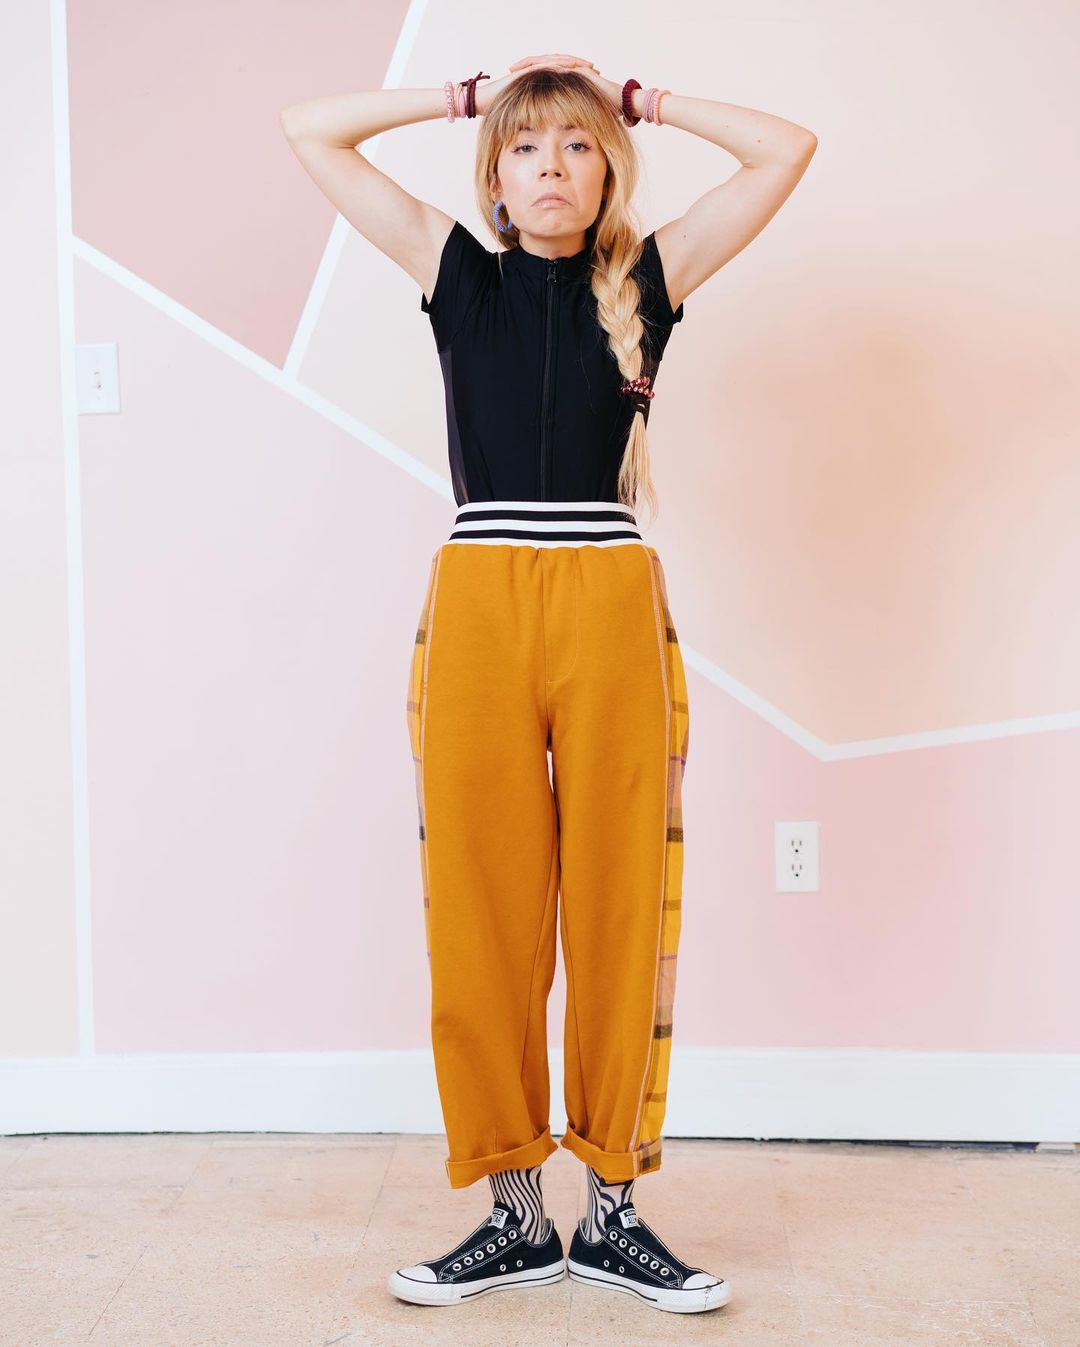 Cute Babe Jennette In Black Top Paired With Orange Lowers